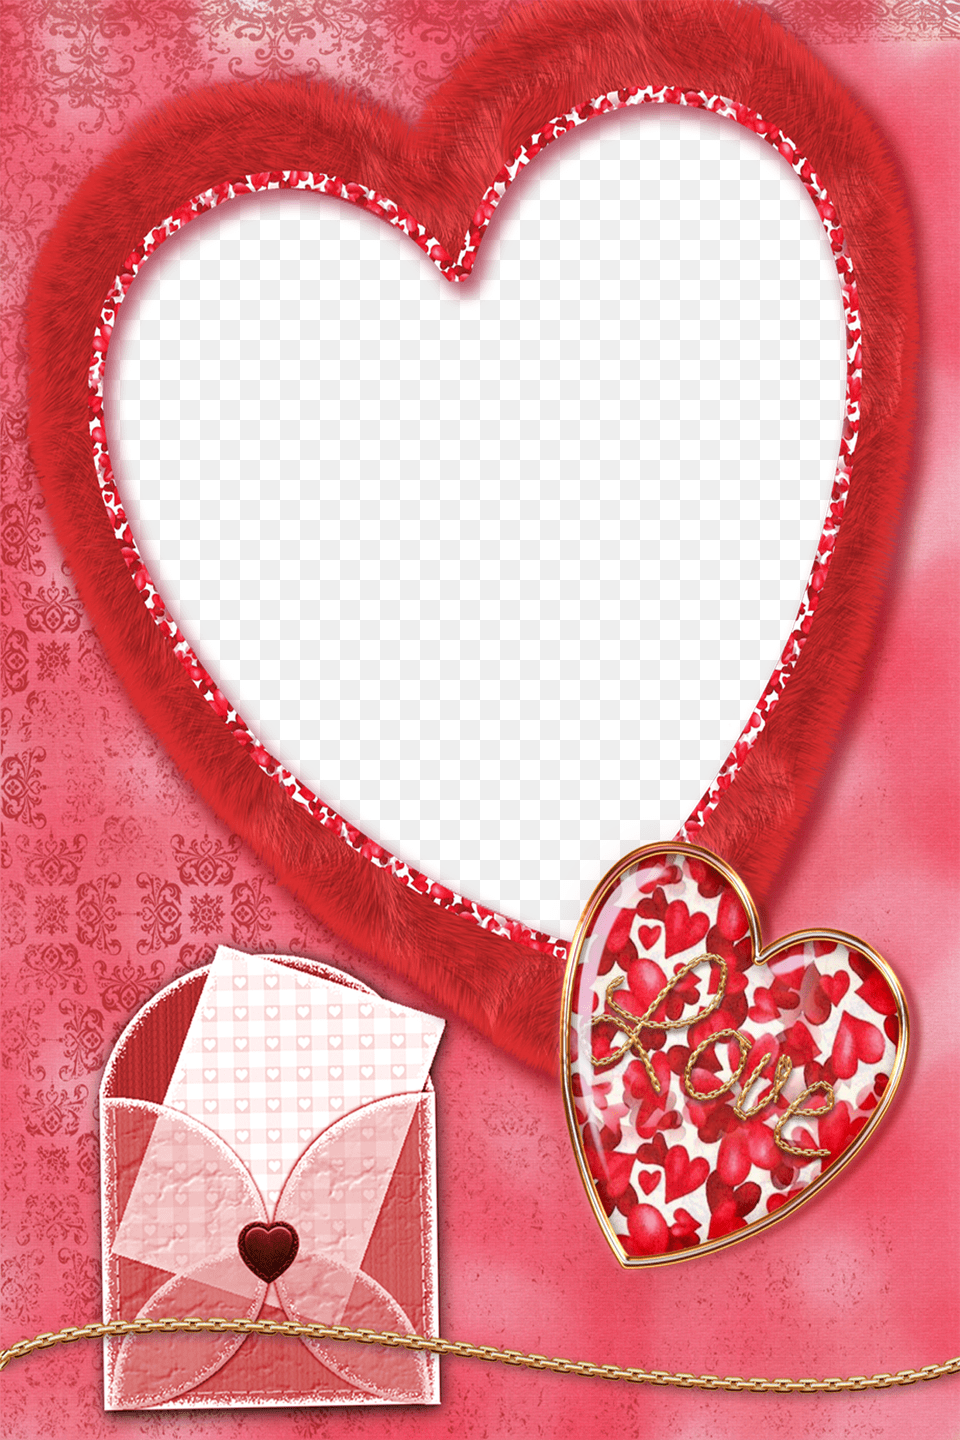 Red Rose Clip Art Frame Heart Shape Frames, Accessories, Jewelry, Locket, Pendant Free Transparent Png